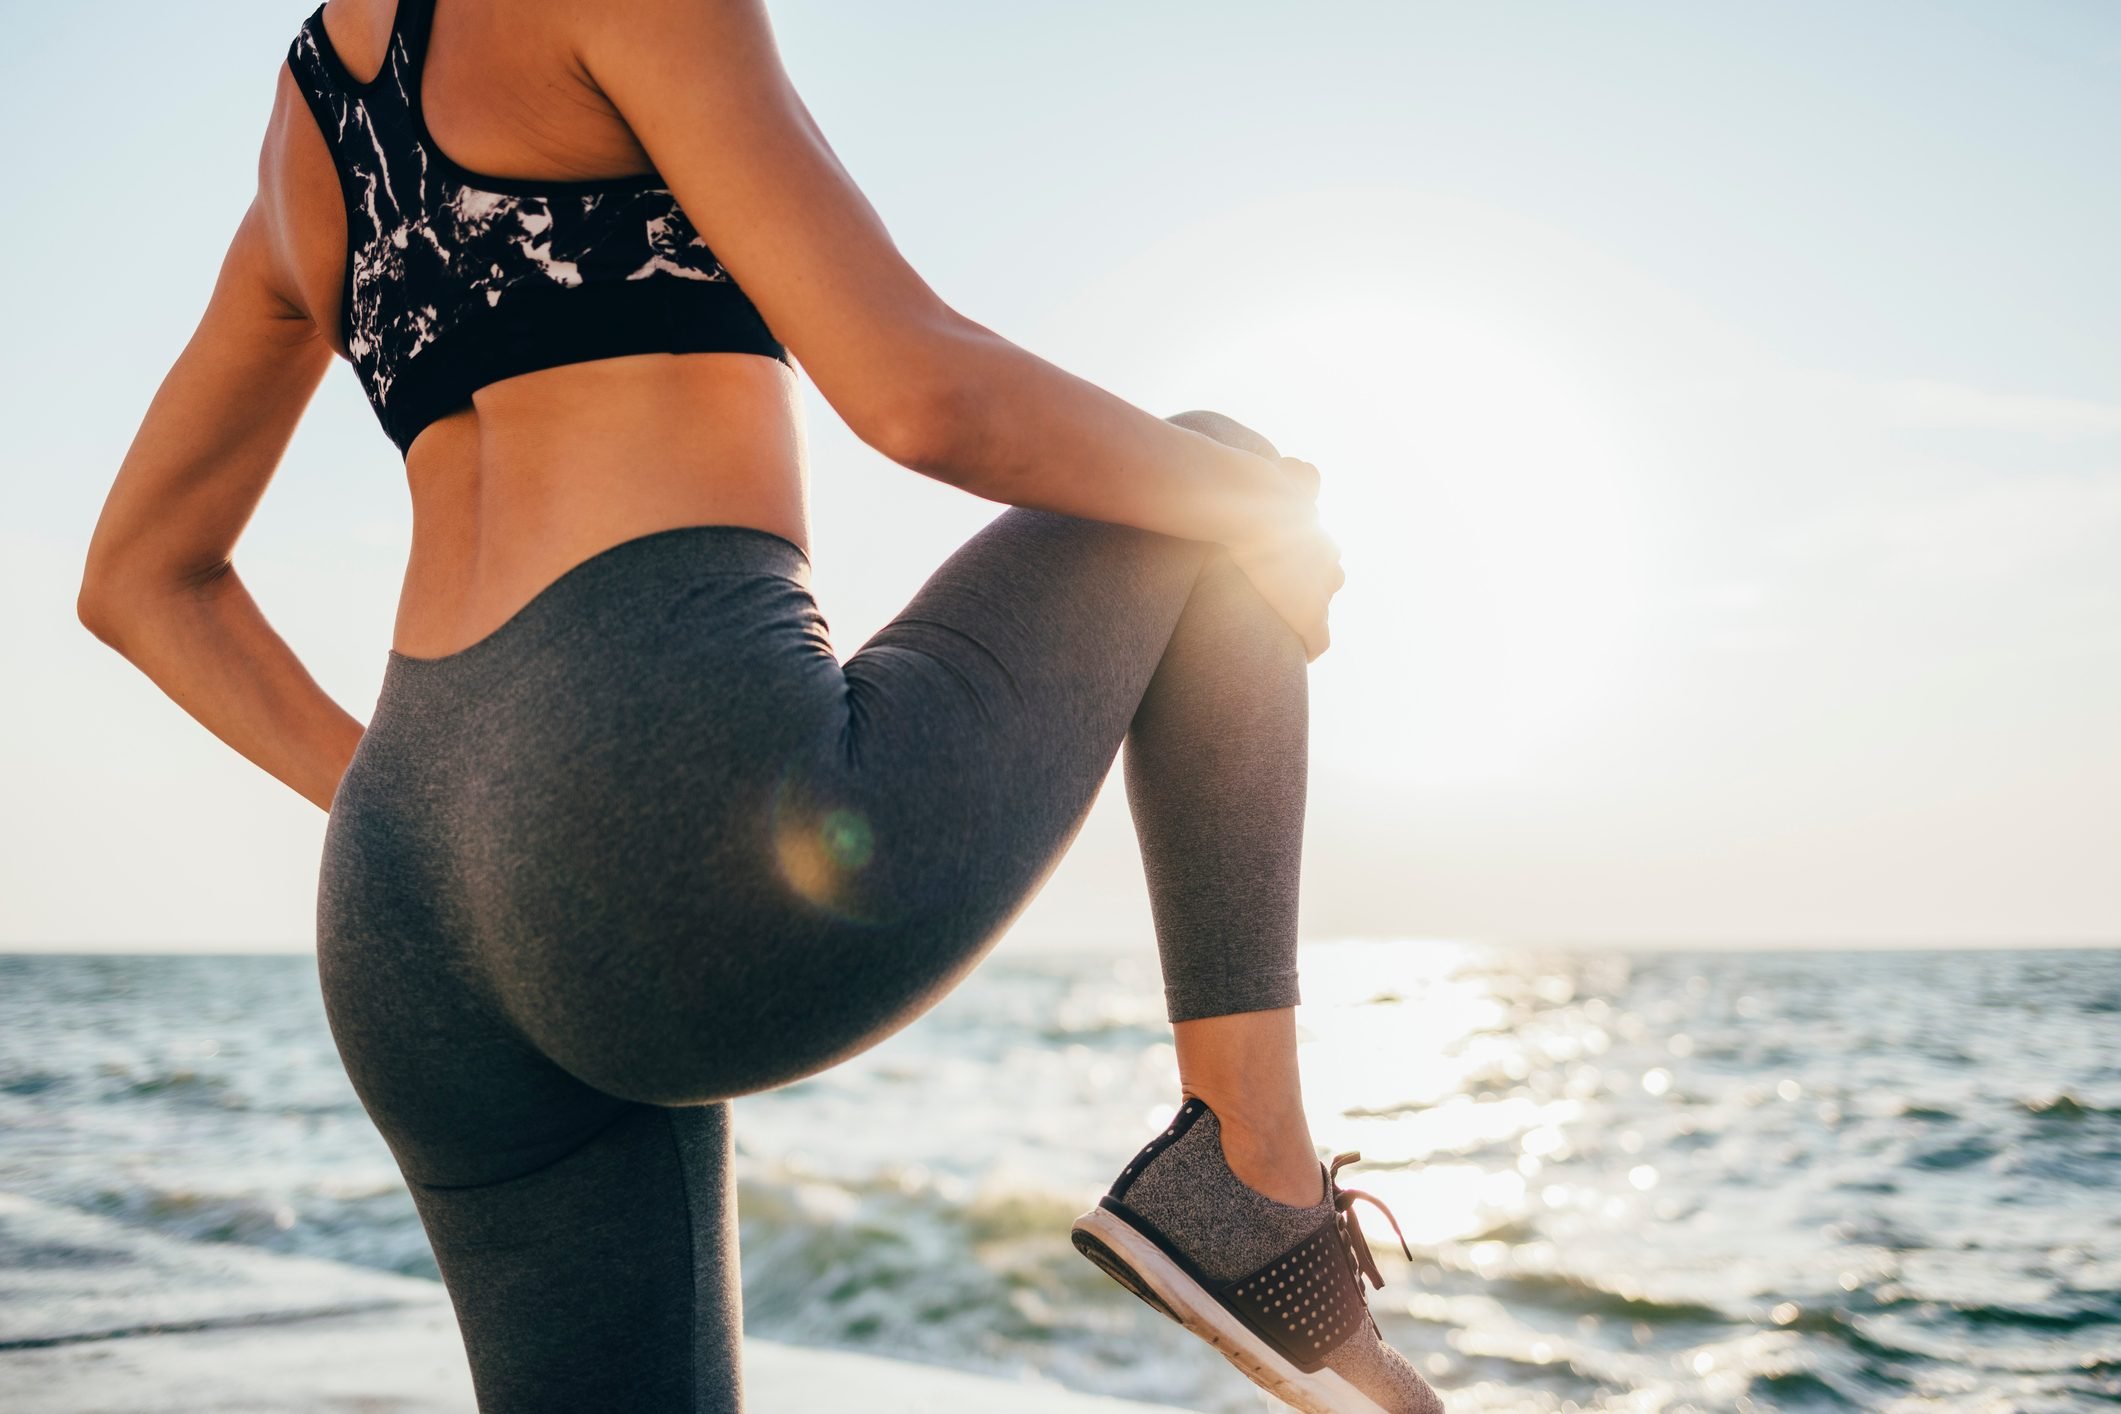 Let's Get Personal: Should You Wear Underwear with Gym Leggings?